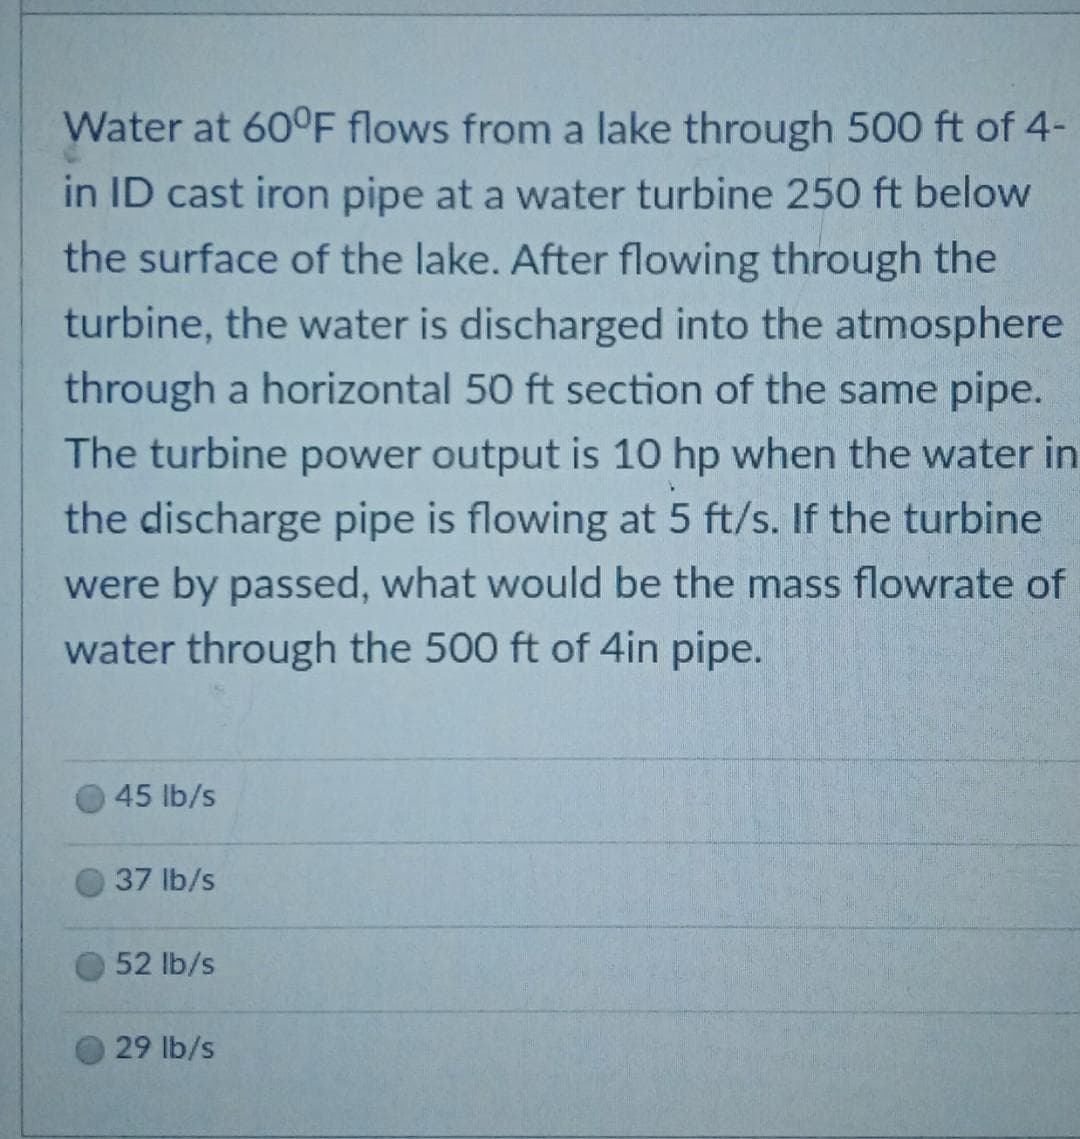 Water at 60°F flows from a lake through 500 ft of 4-
in ID cast iron pipe at a water turbine 250 ft below
the surface of the lake. After flowing through the
turbine, the water is discharged into the atmosphere
through a horizontal 50 ft section of the same pipe.
The turbine power output is 10 hp when the water in
the discharge pipe is flowing at 5 ft/s. If the turbine
were by passed, what would be the mass flowrate of
water through the 500 ft of 4in pipe.
45 lb/s
37 lb/s
52 lb/s
29 lb/s